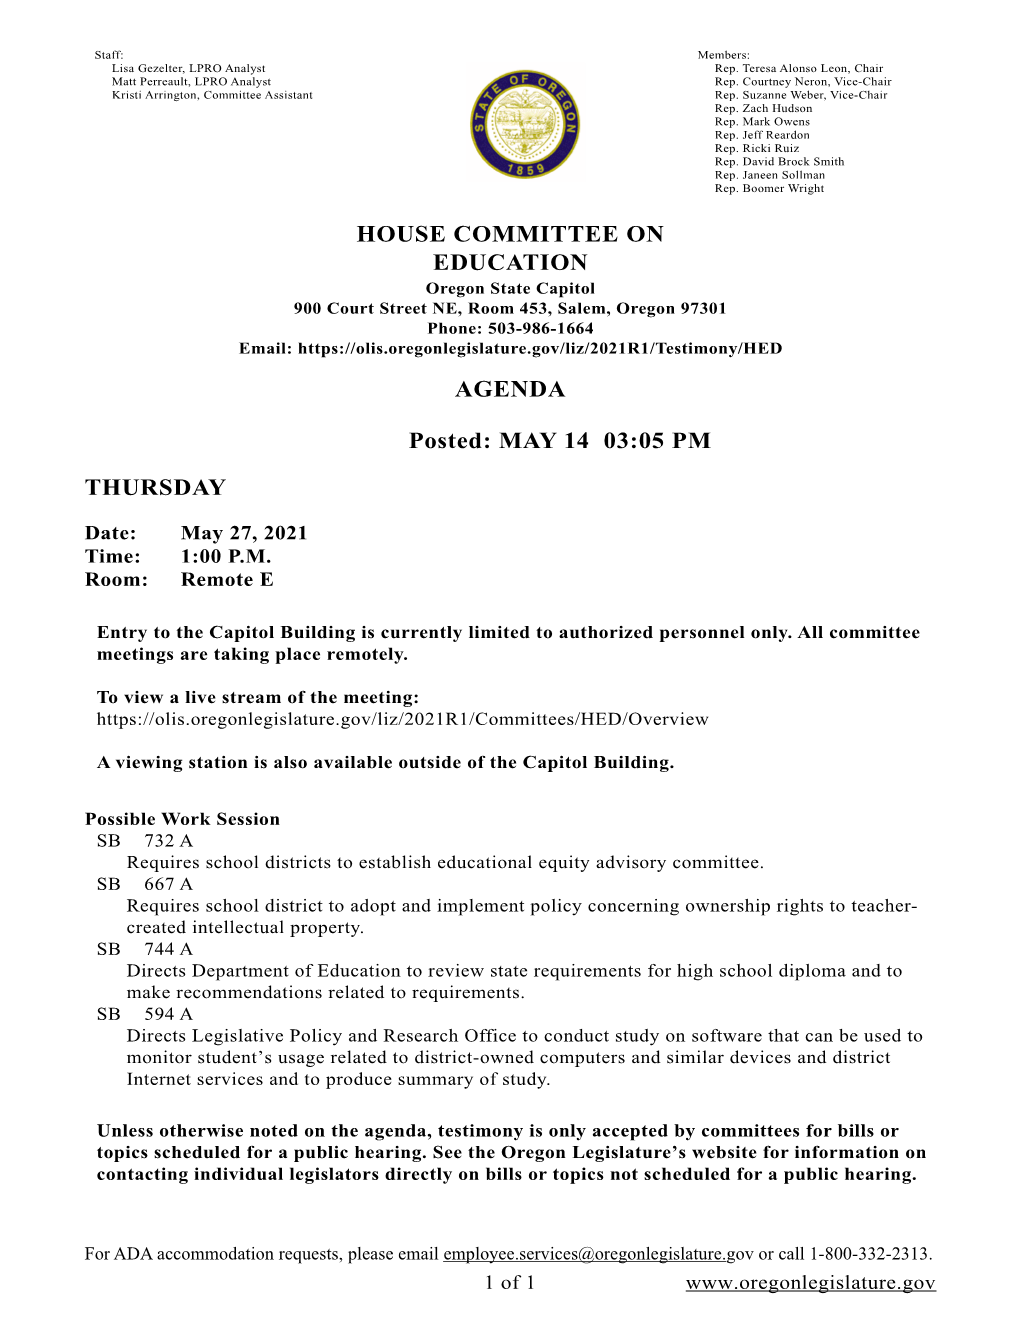 HOUSE COMMITTEE on EDUCATION AGENDA Posted: MAY 14 03:05 PM THURSDAY